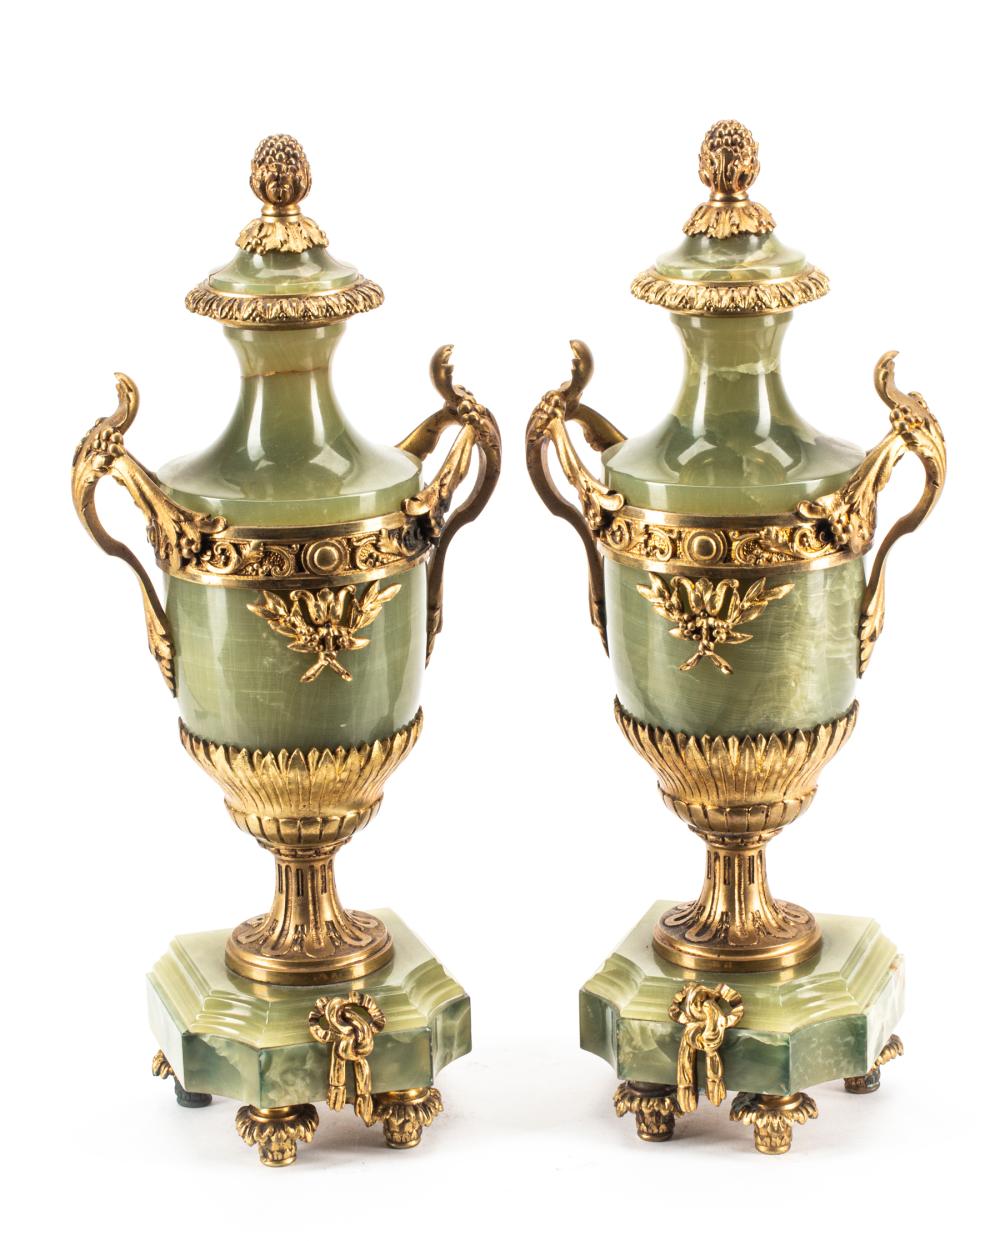 PAIR OF FRENCH BRONZE AND ONYX 2e357c